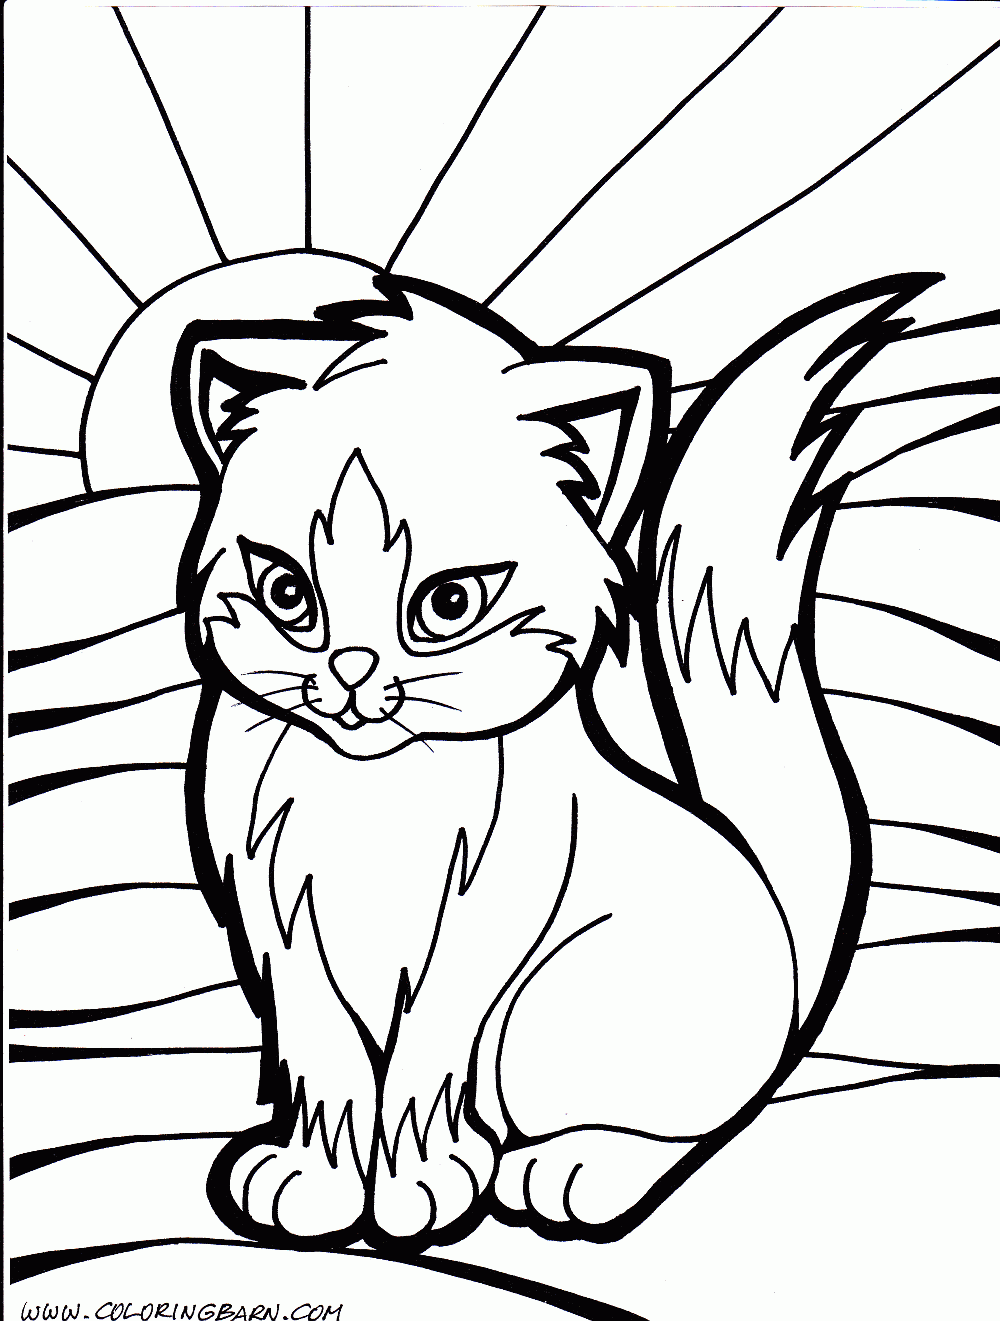 19 Free Pictures for: Kitten Coloring Pages. Temoon.us